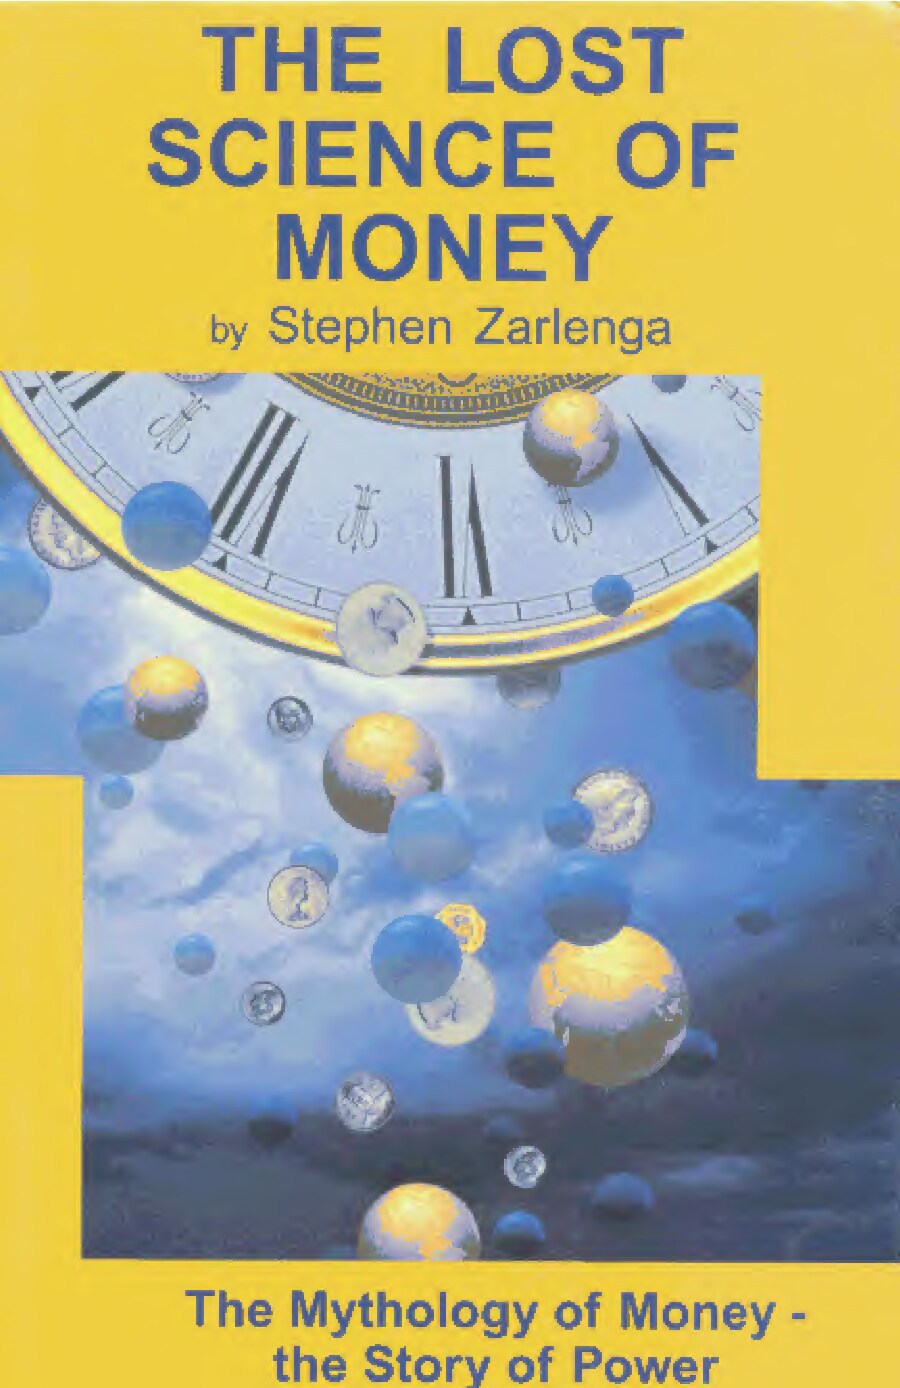 The Lost Science Of Money; The Mythology Of Money And Story Of Power ( 2002) - Stephen Zarlenga